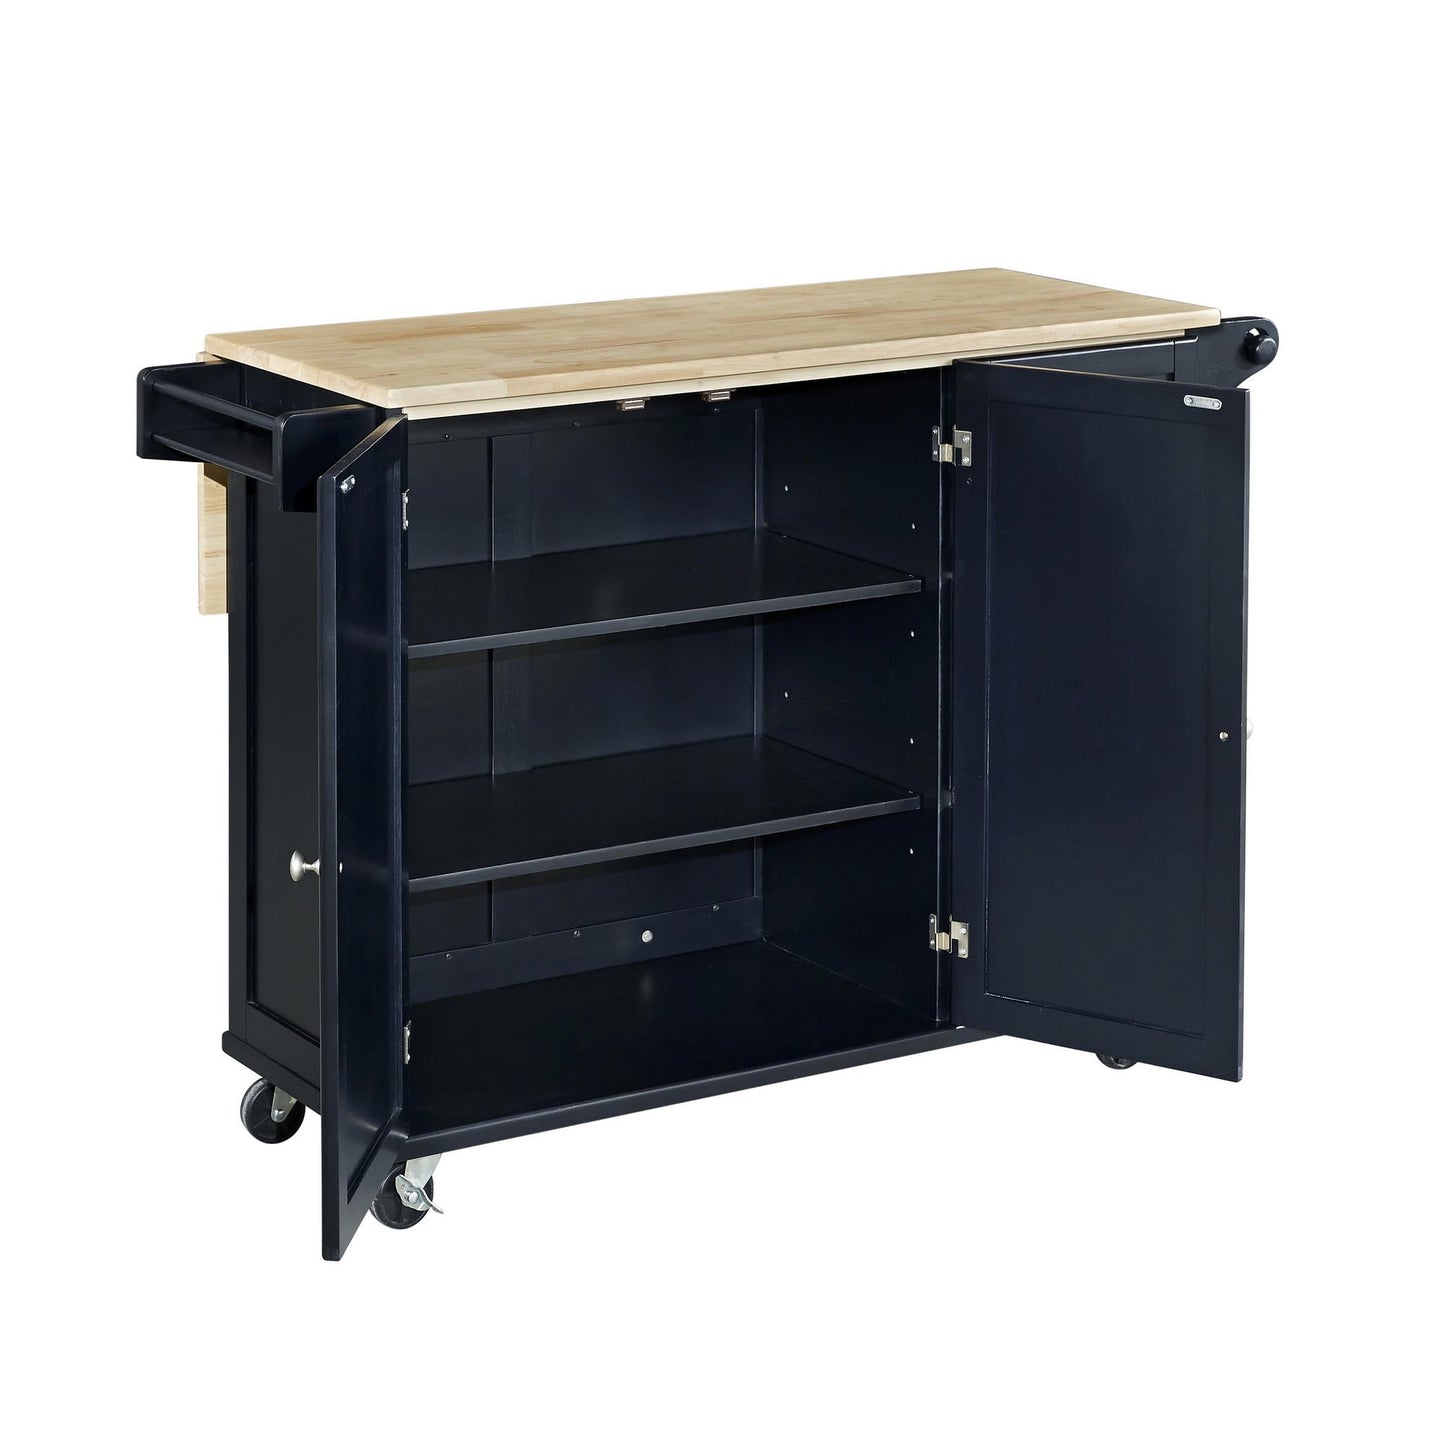 Dolly Madison Black Kitchen Cart W/Drop Leaf and Drawers